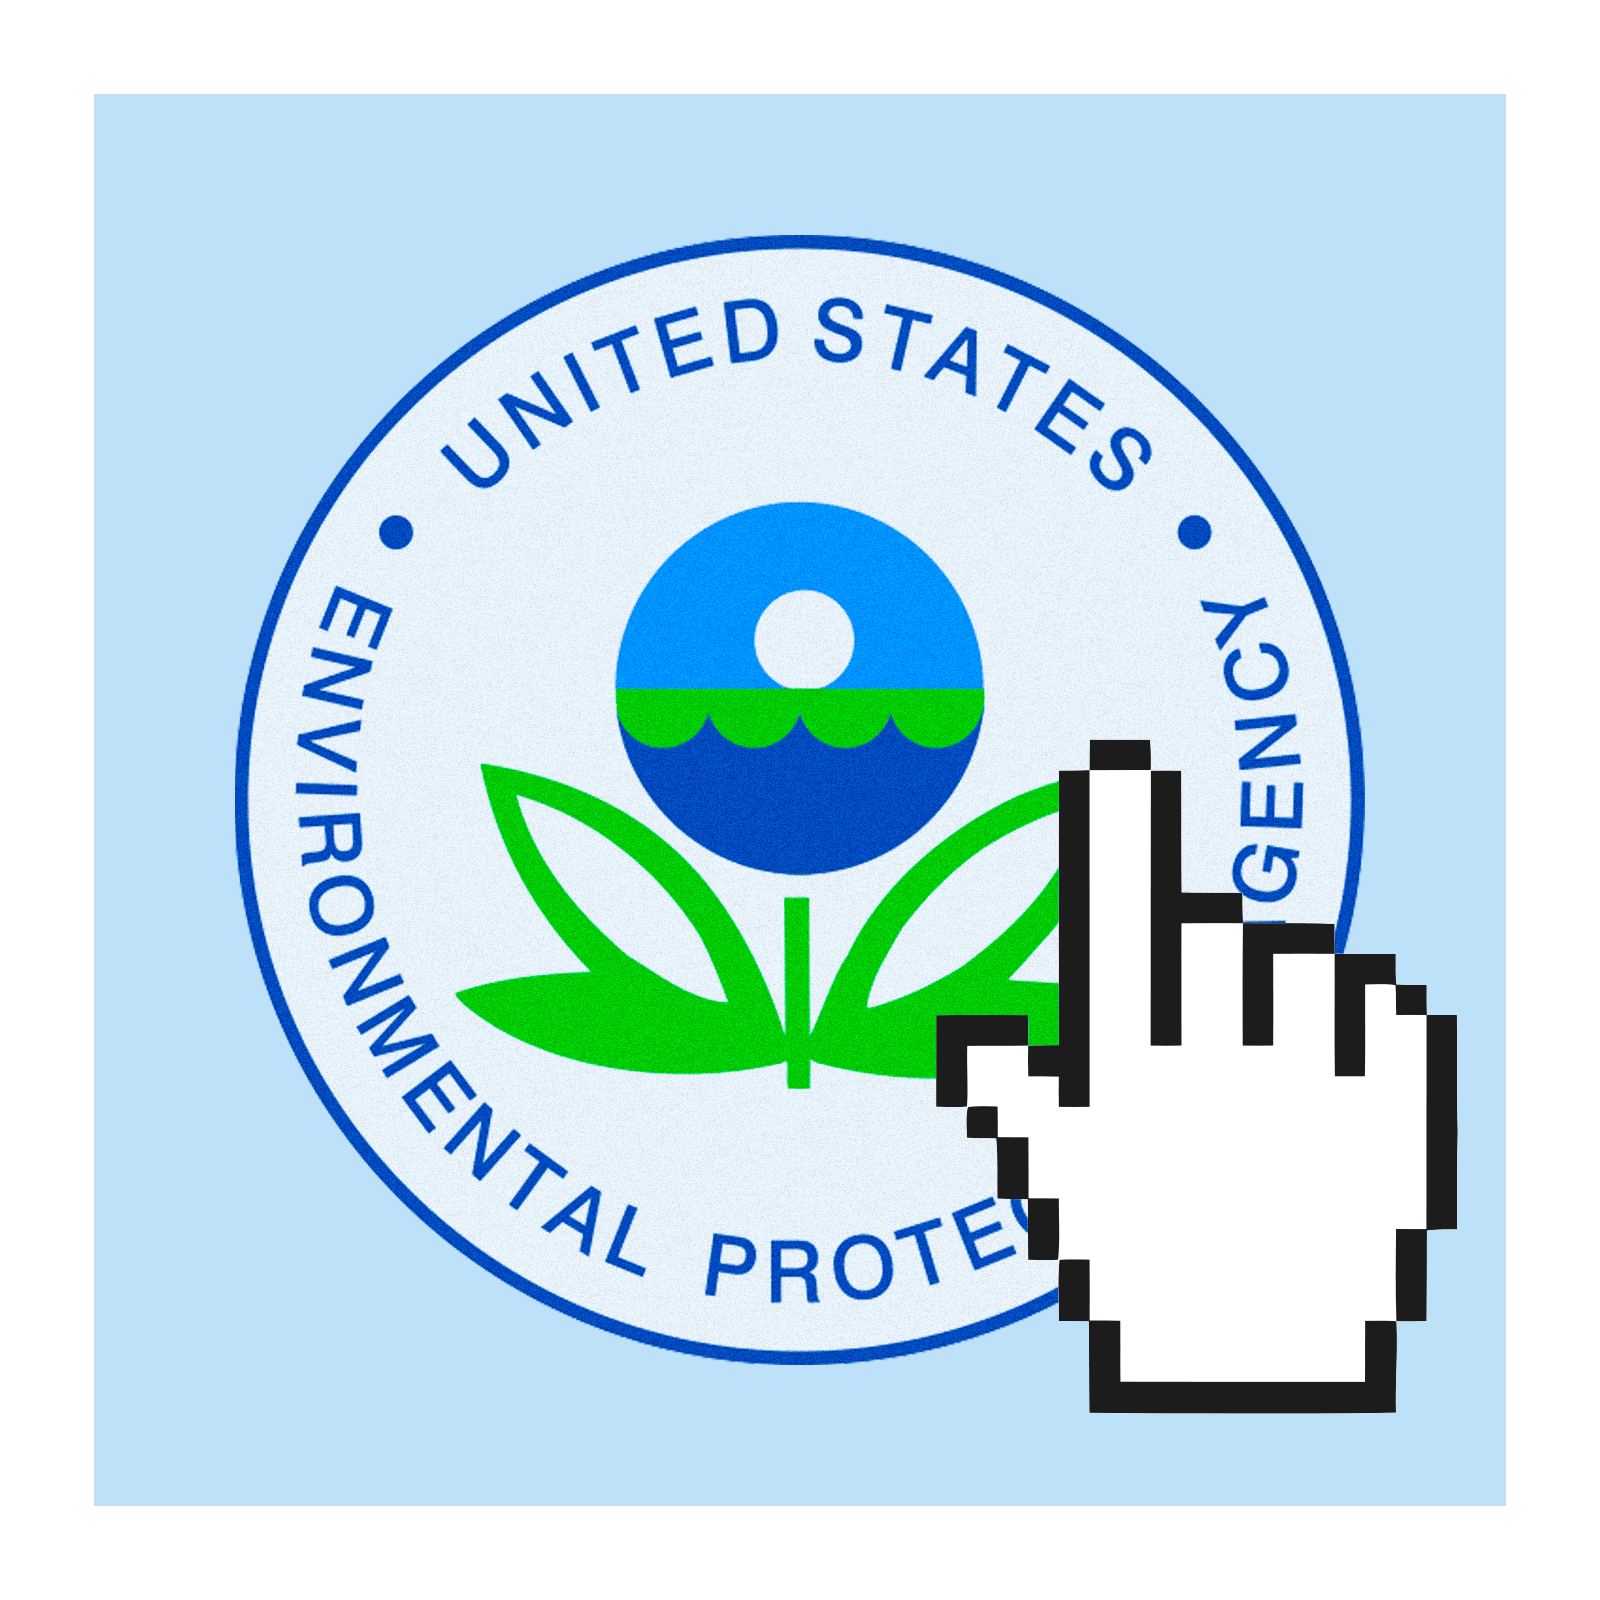 The EPA logo with a hand shaped cursor on top of it